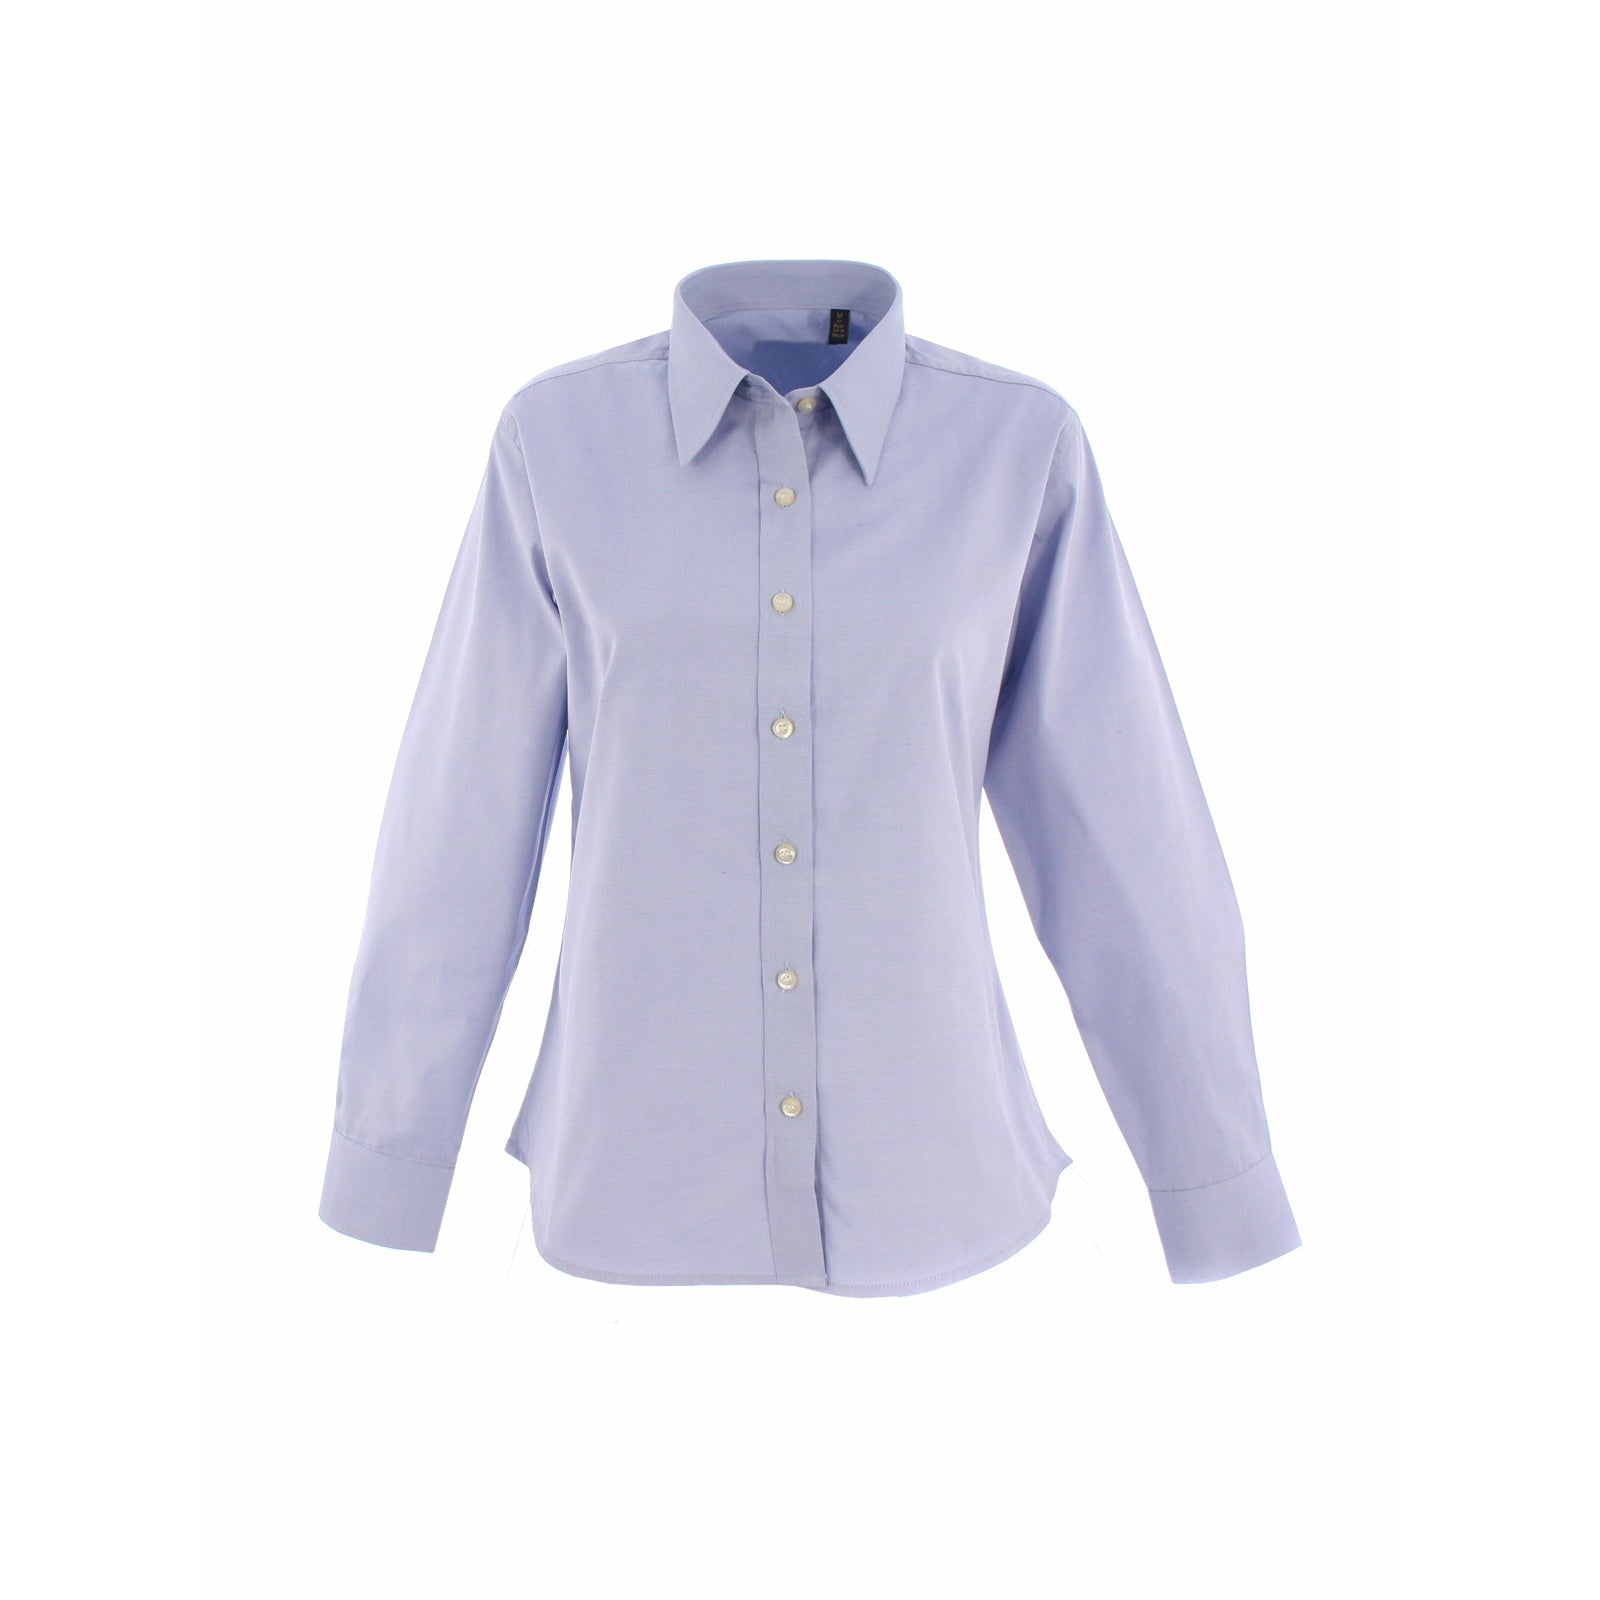 Ladies Pinpoint Oxford Full Sleeve Shirt - Light Blue